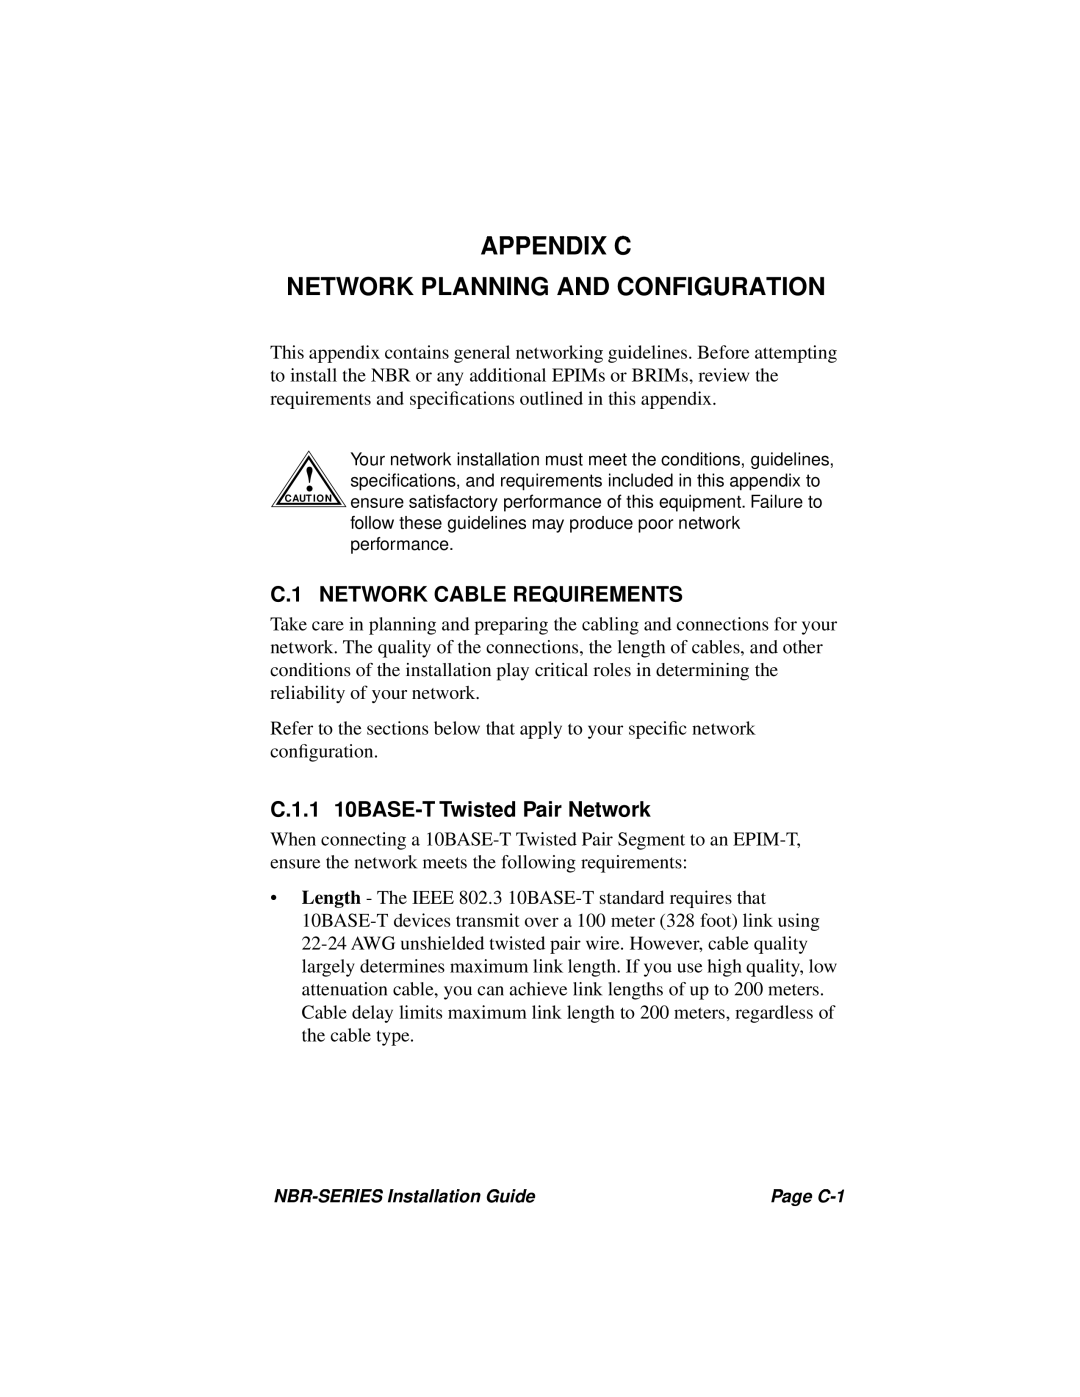 Cabletron Systems NBR-420, NBR-220, NBR-620 Appendix C Network Planning And Configuration, C.1 NETWORK CABLE REQUIREMENTS 